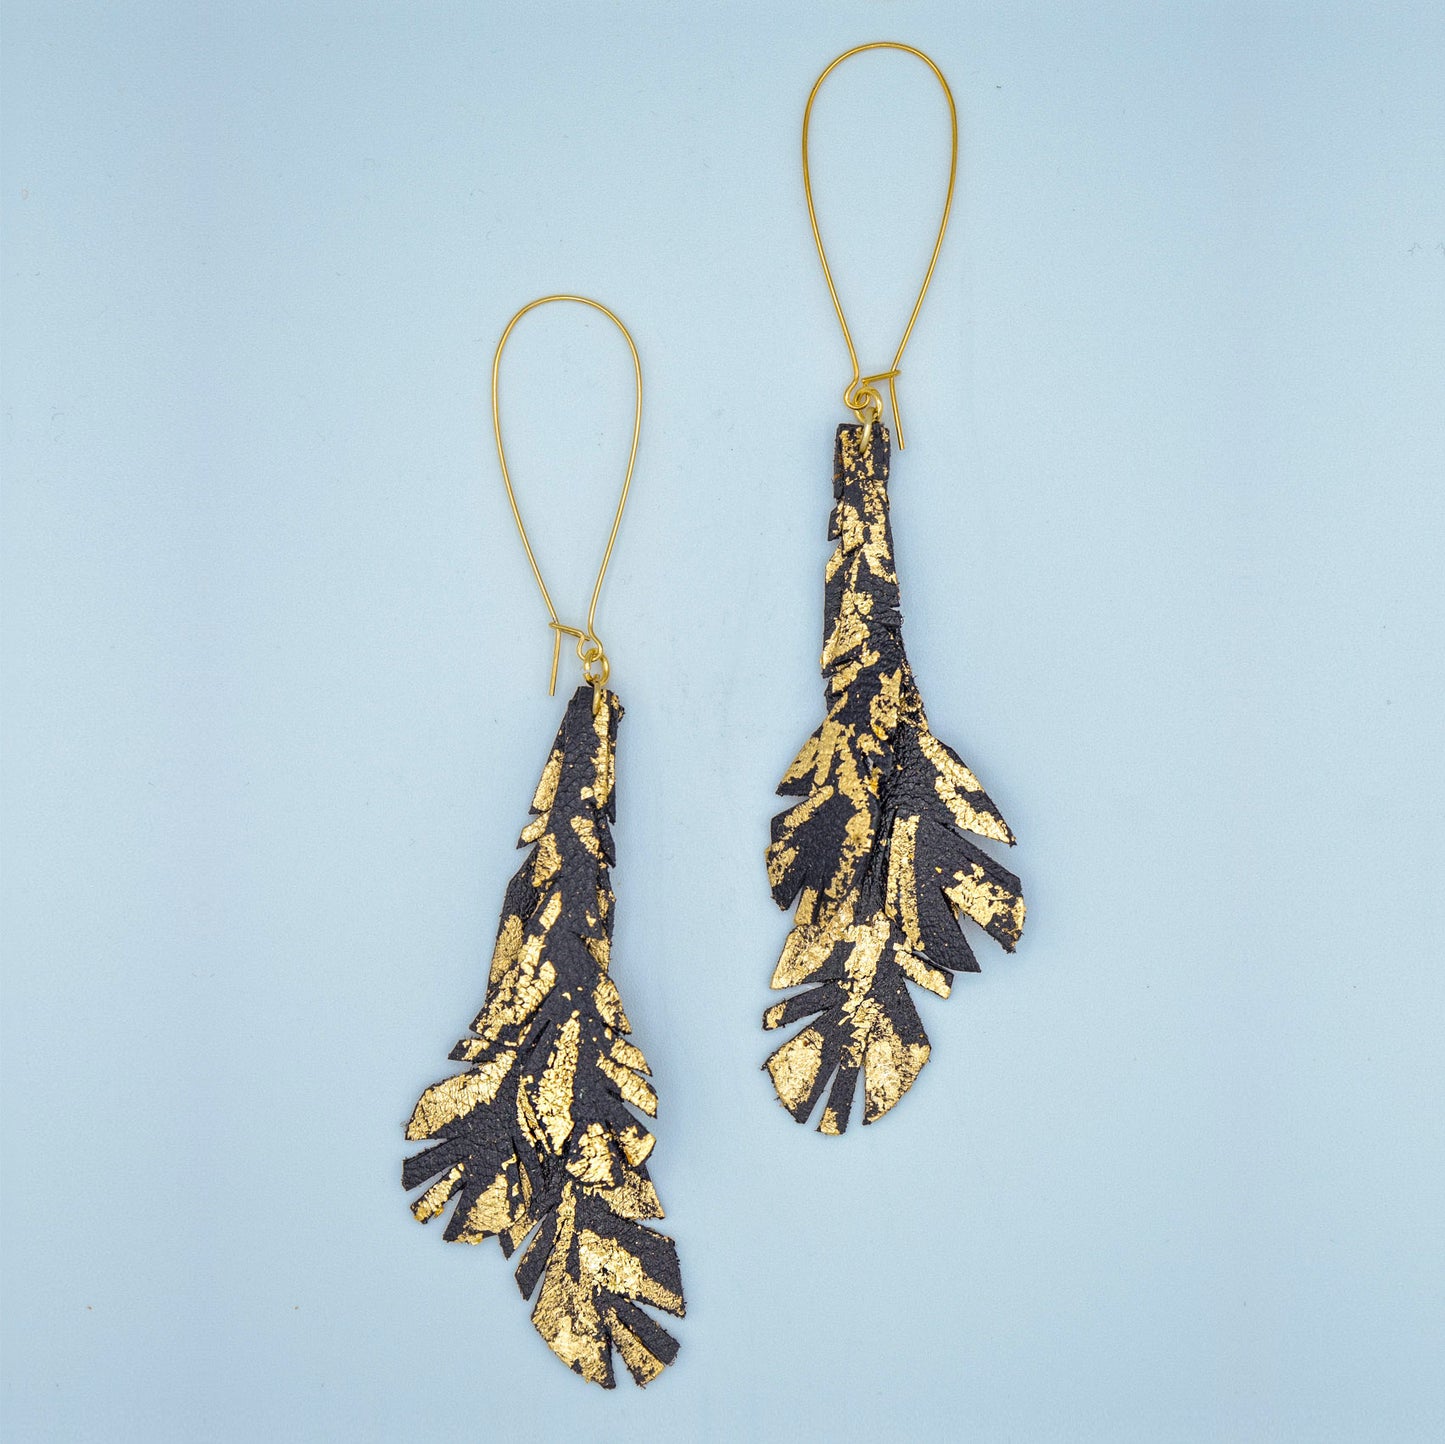 Feather Leather Earrings with Gold Metal Leaf- Black